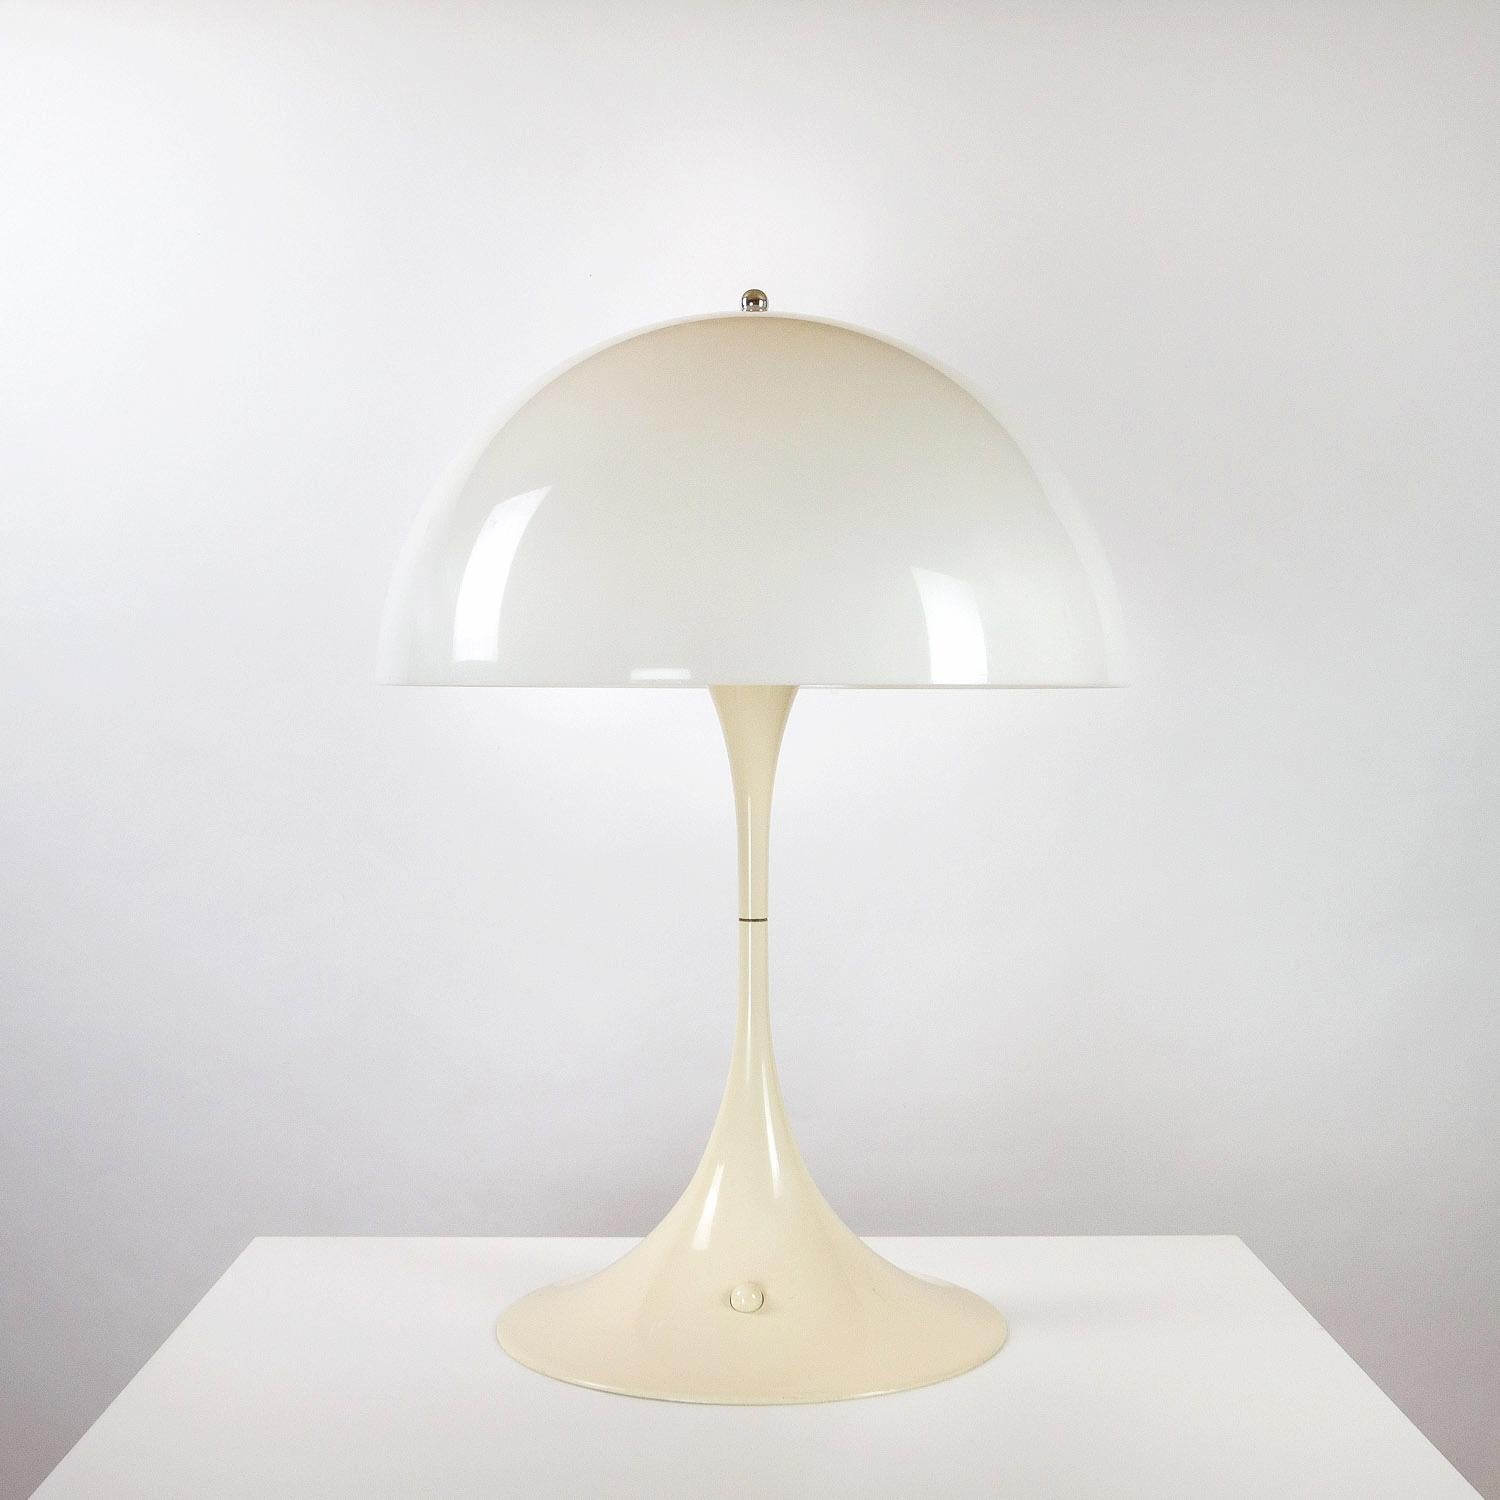 An early Verner Panton Panthella table lamp with opal acrylic shade, plastic tulip base and metal stand. Designed by Panton in 1971 for Louis Poulsen, Denmark, the Panthella is instantly recognizable. Possibly his most iconic piece.